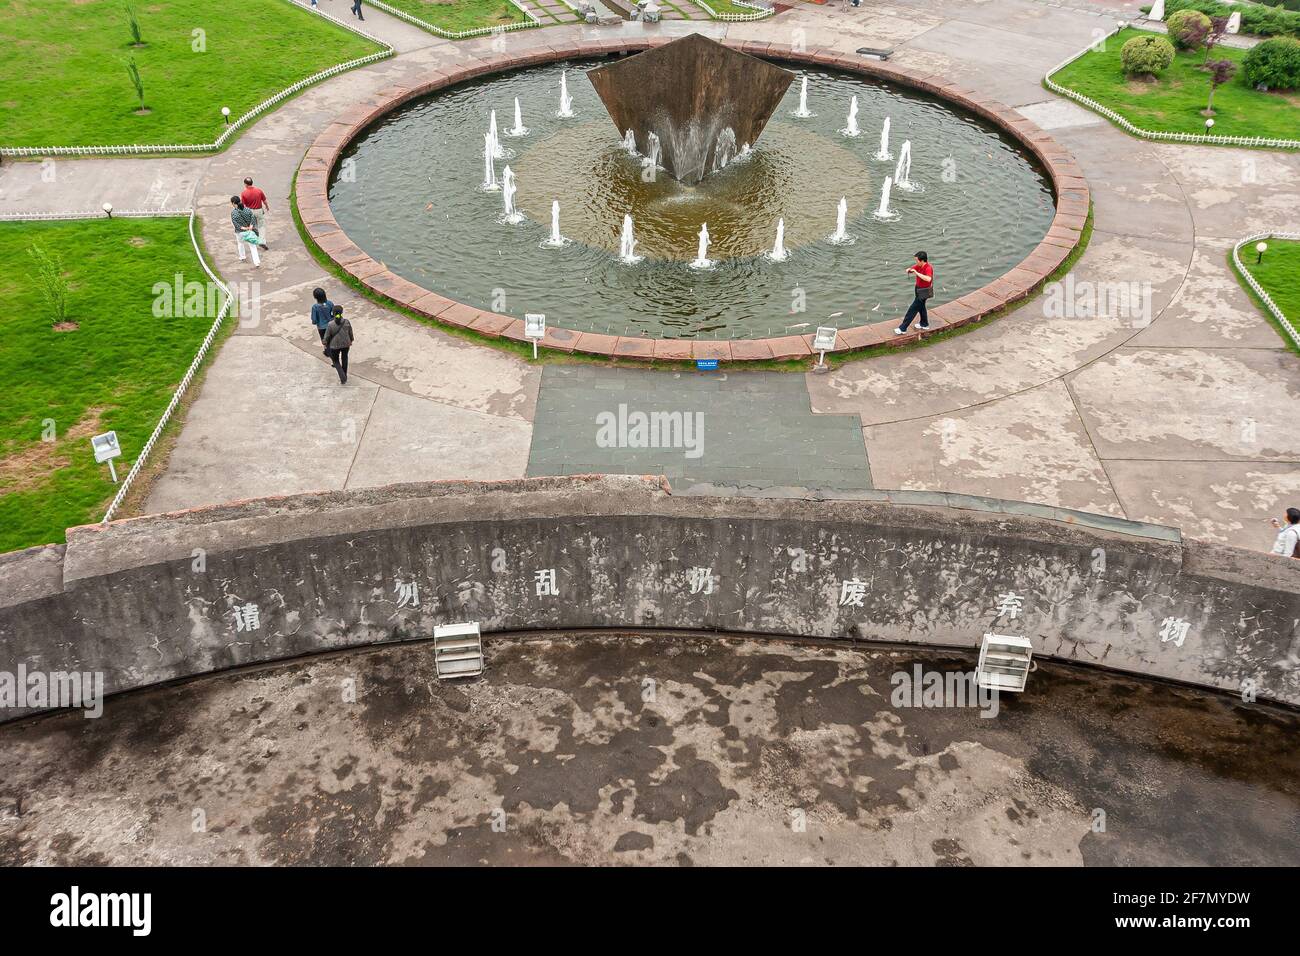 Three Gorges Dam, China - May 6, 2010: Yangtze River. Aerial view on large fountain near visitor center with people around. Green lawn, cement stones, Stock Photo